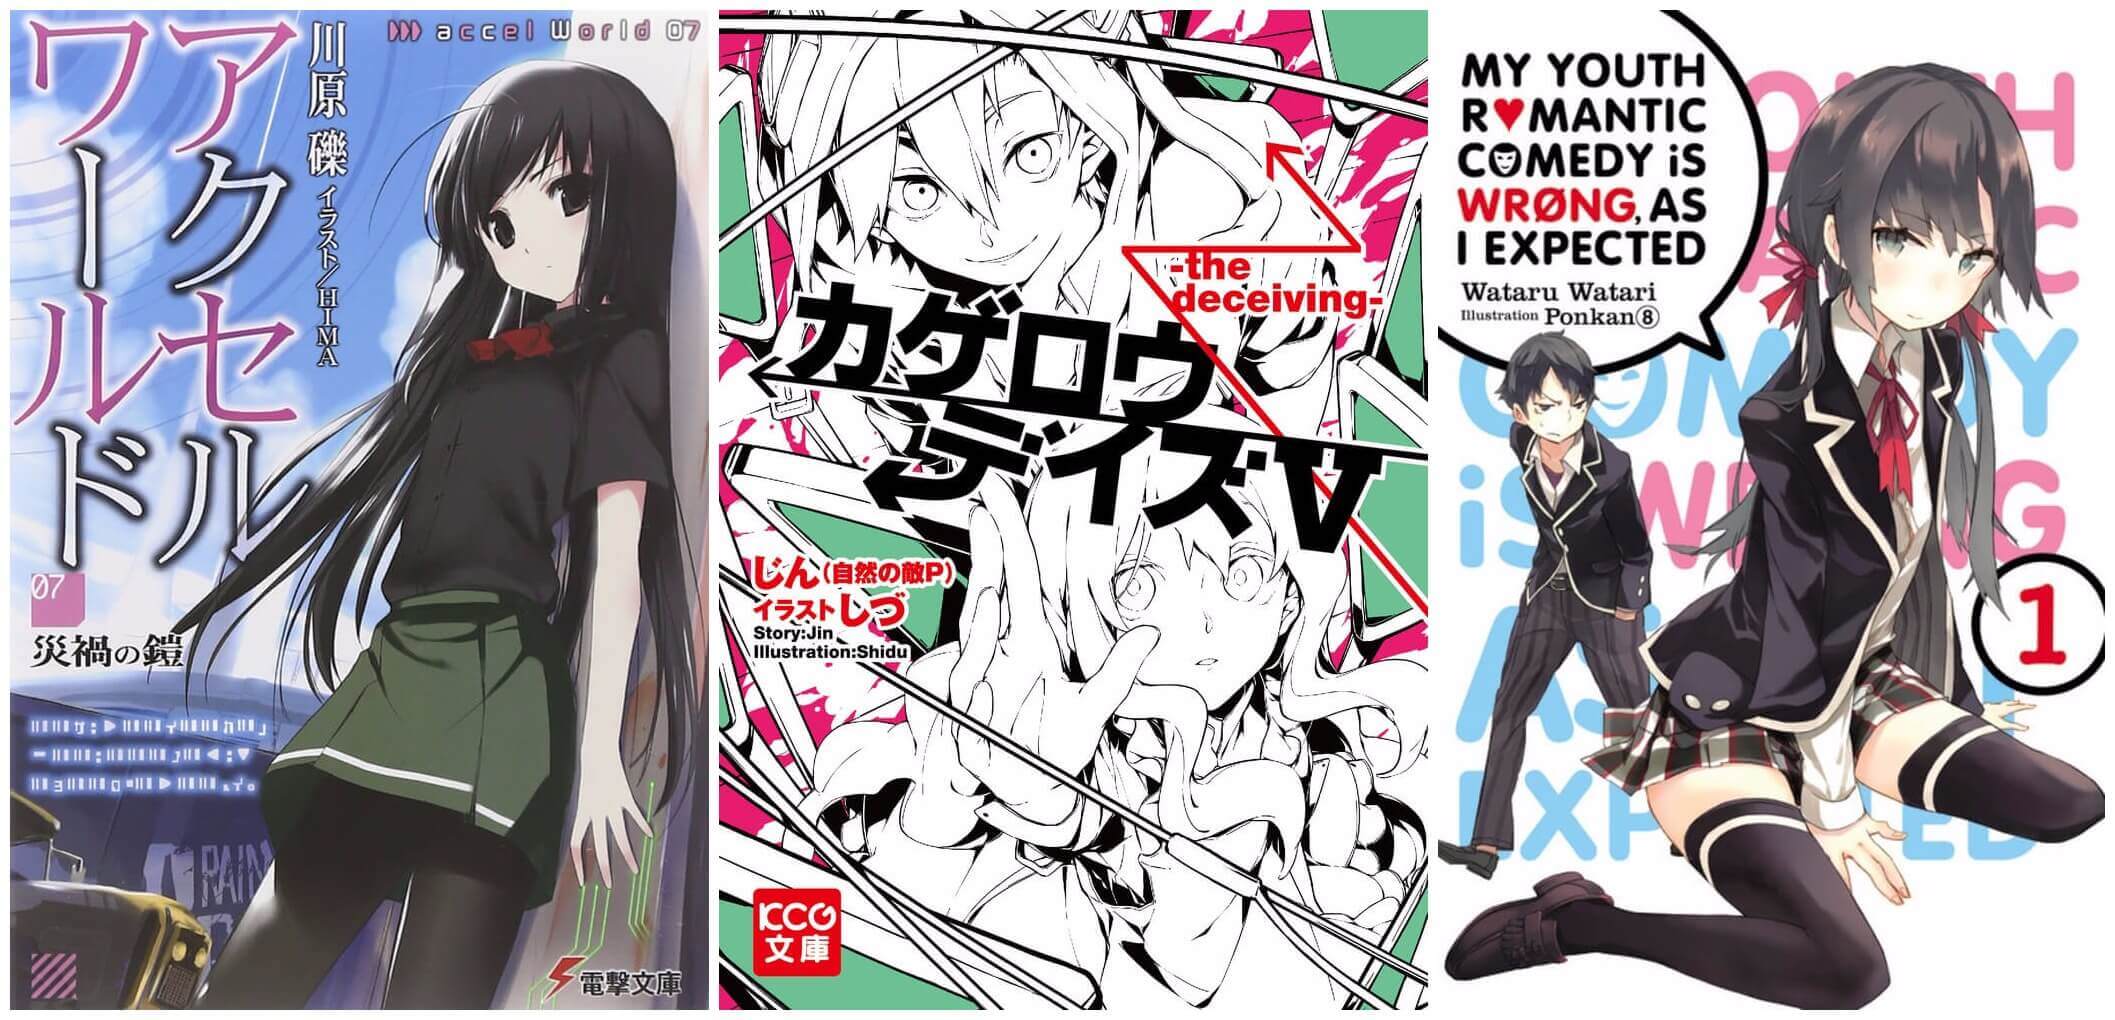 September 2016 Manga Releases Covers for Accel World, Kagerou Daze, and My Youth Romantic Comedy is Wrong, as I Expected.